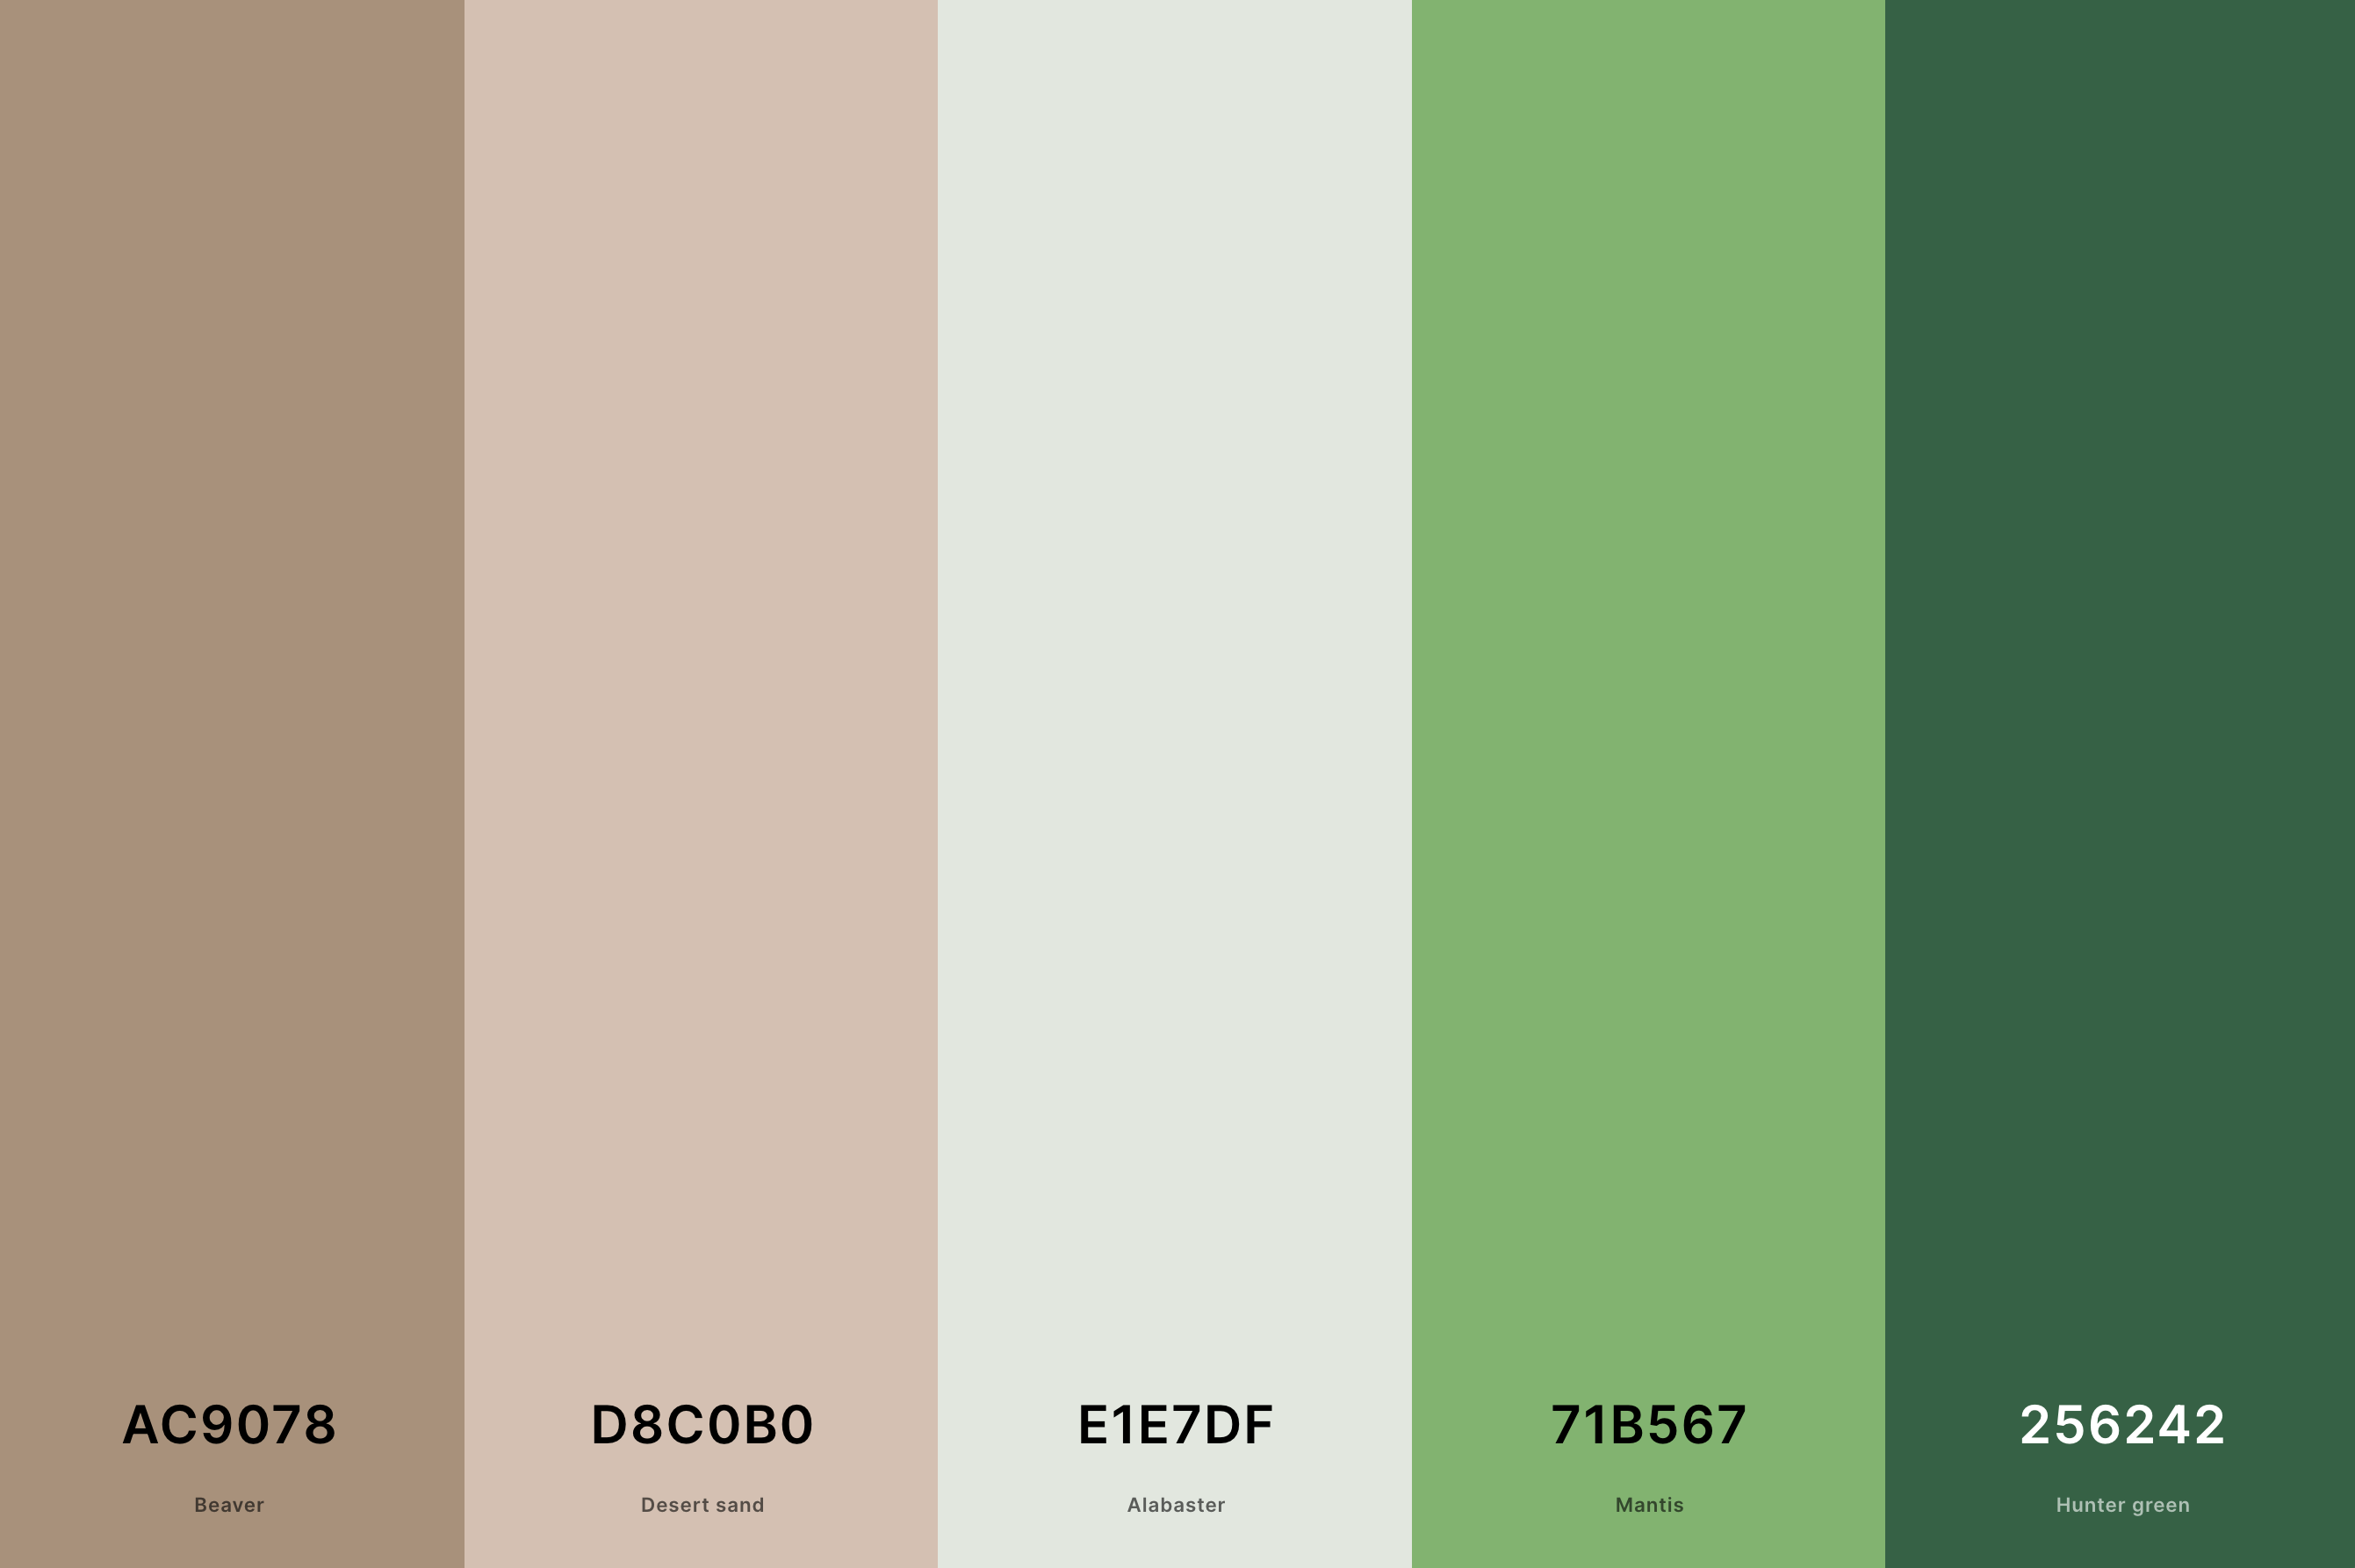 3. Green And Tan Color Palette Color Palette with Beaver (Hex #AC9078) + Desert Sand (Hex #D8C0B0) + Alabaster (Hex #E1E7DF) + Mantis (Hex #71B567) + Hunter Green (Hex #256242) Color Palette with Hex Codes